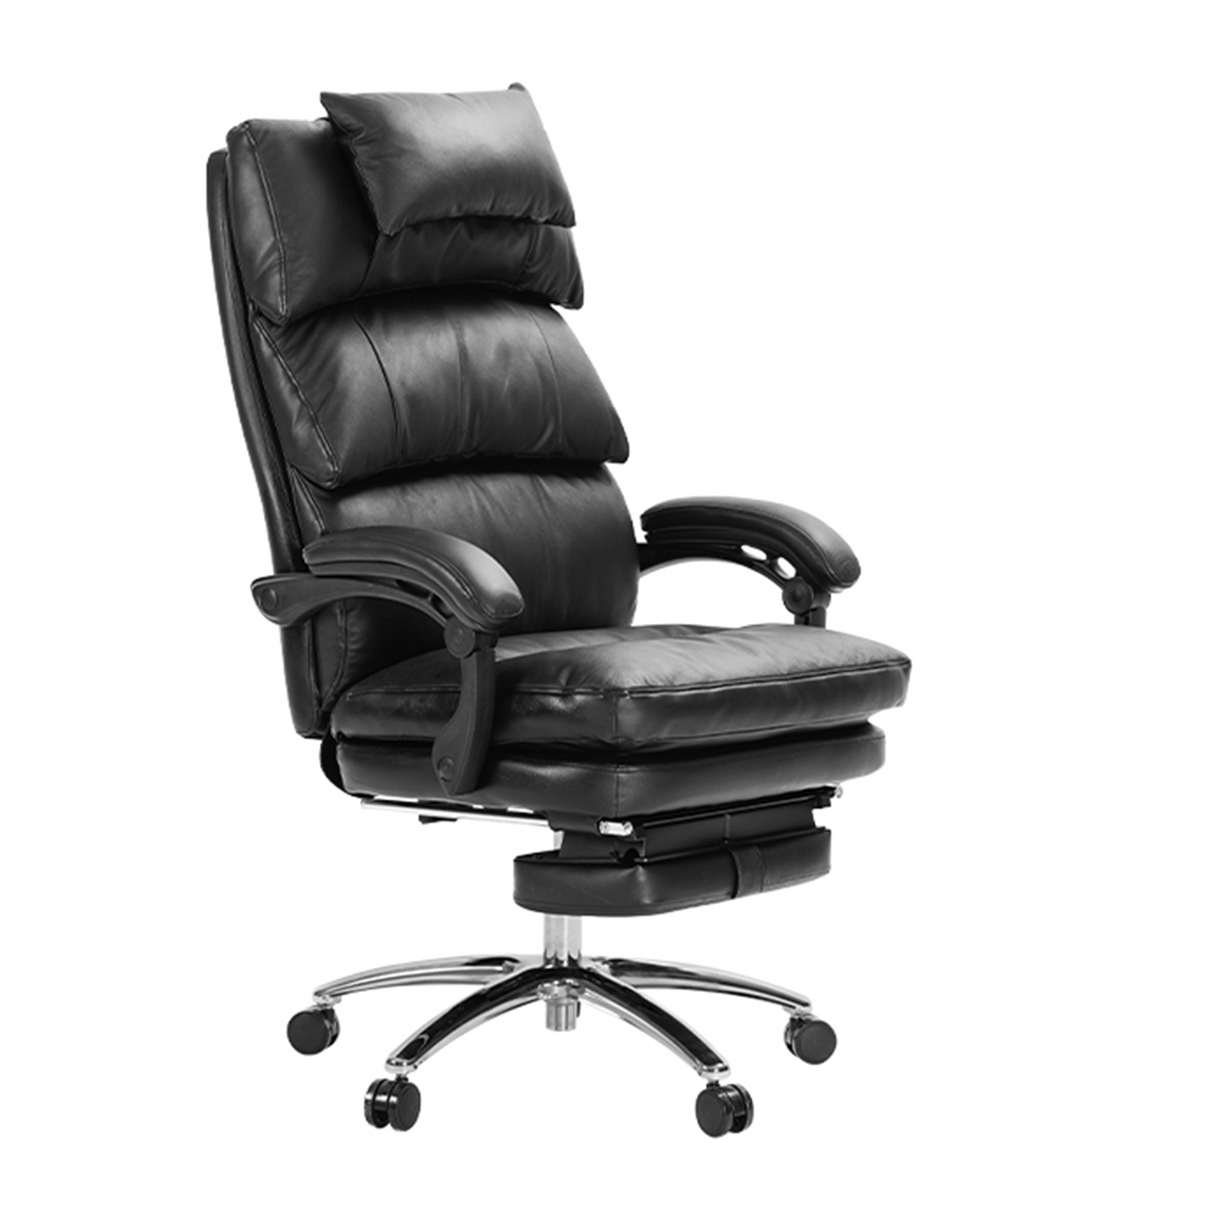 Paddy Upholstered Office Chair